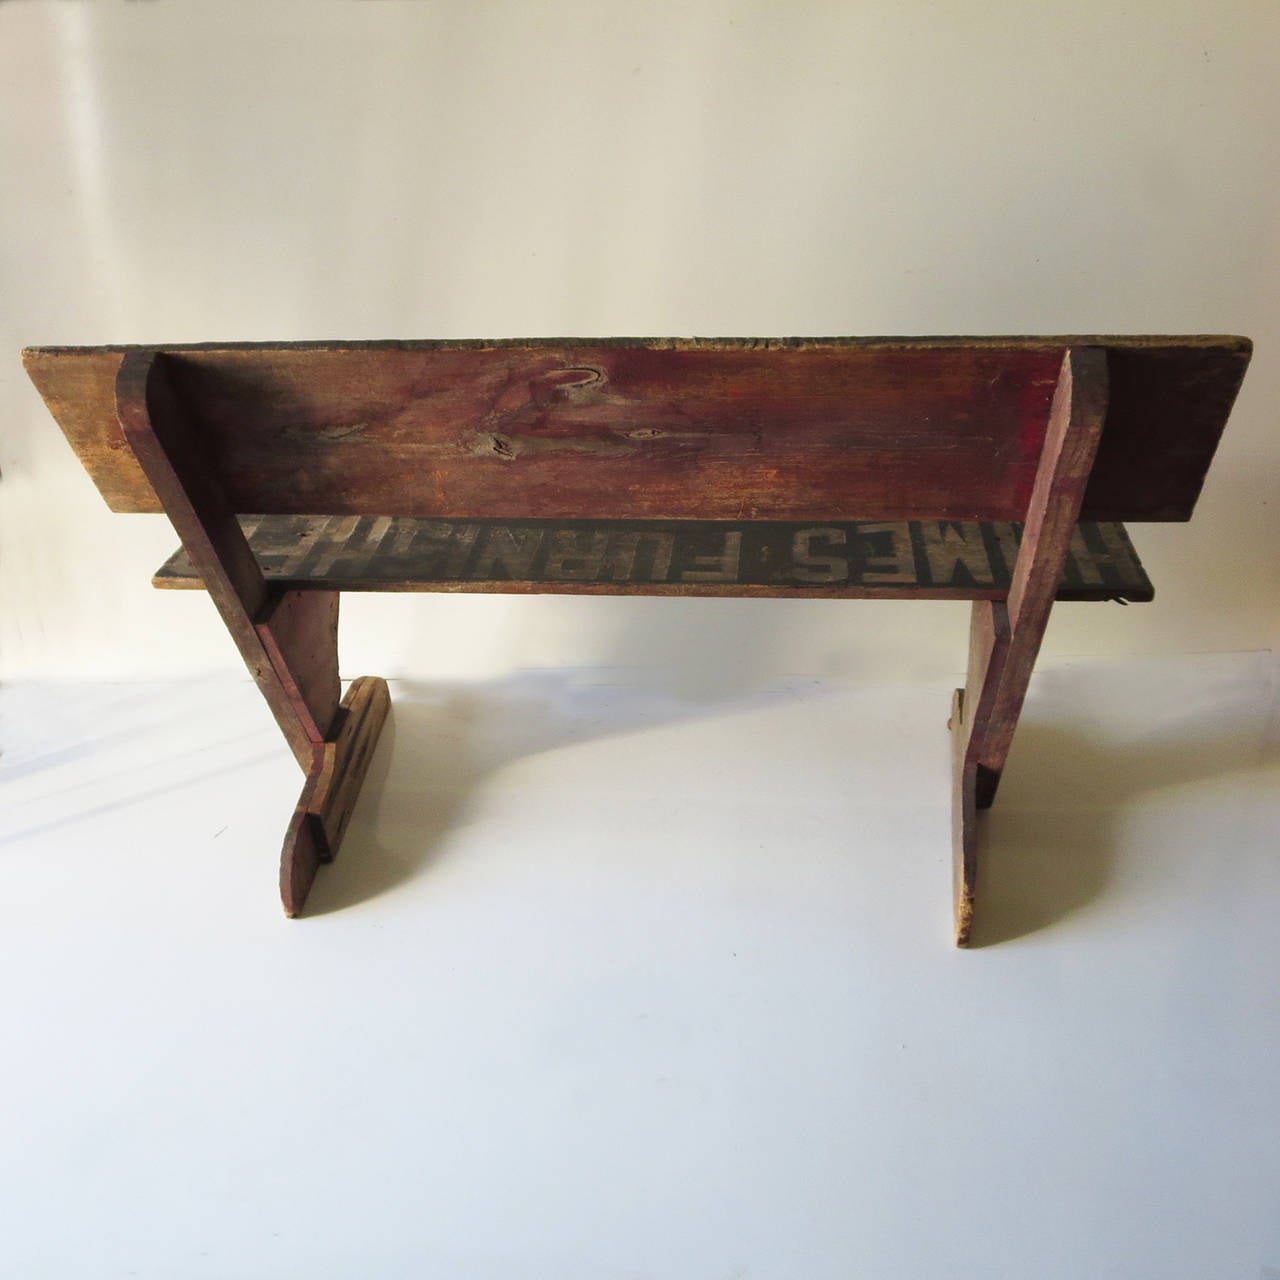 Early 20th Century Charming Park Bench with Embossed Advertising